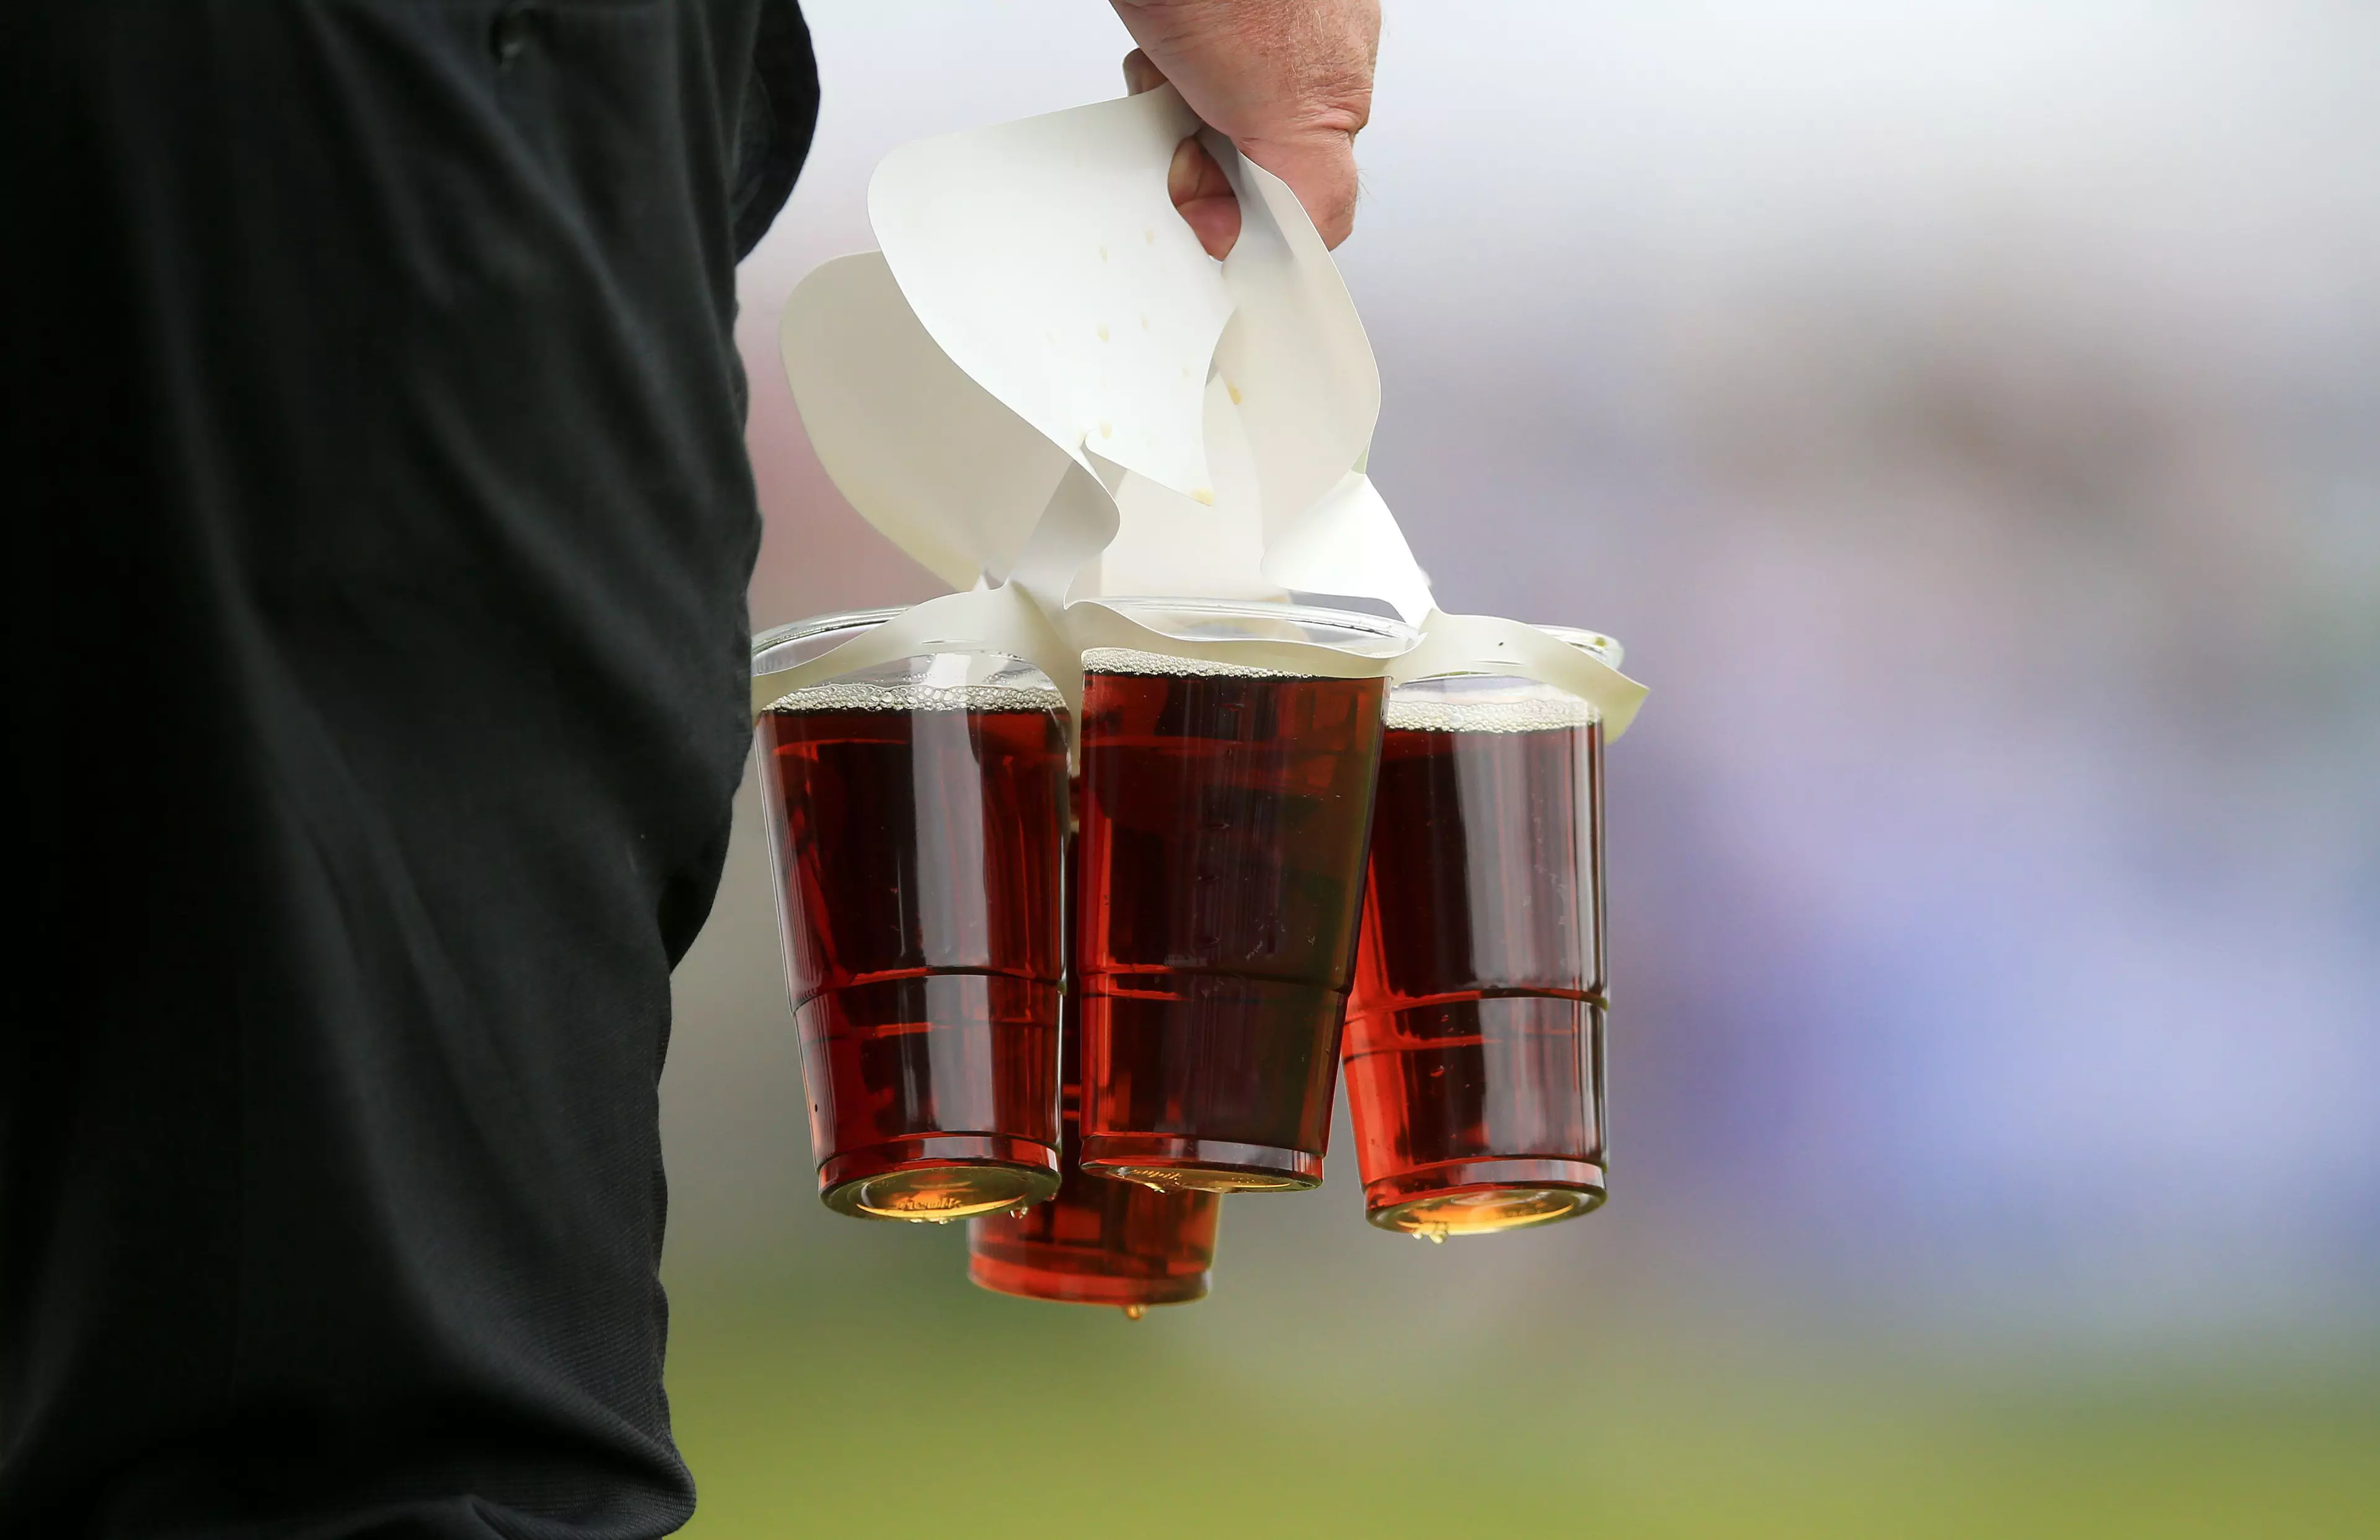 Spectators of other sports, including cricket, can drink in stadiums.